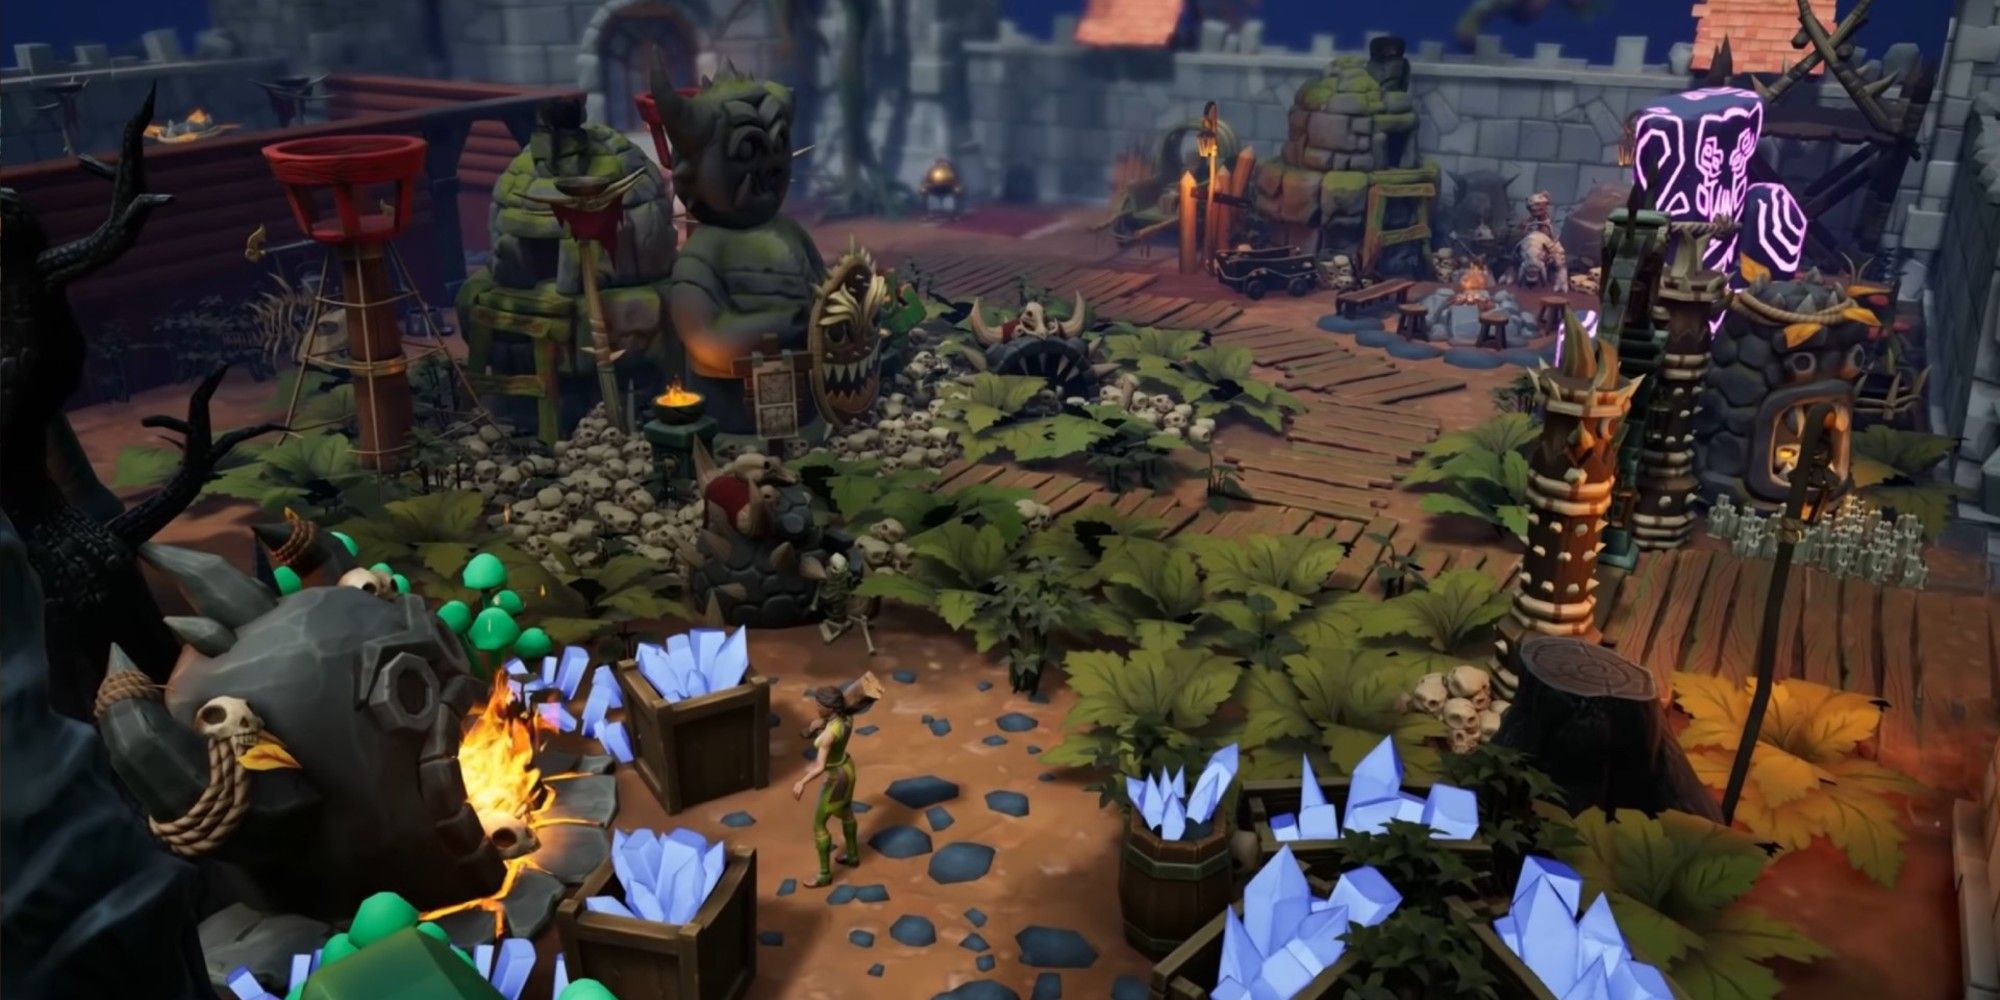 A player builds a custom base in Torchlight 3